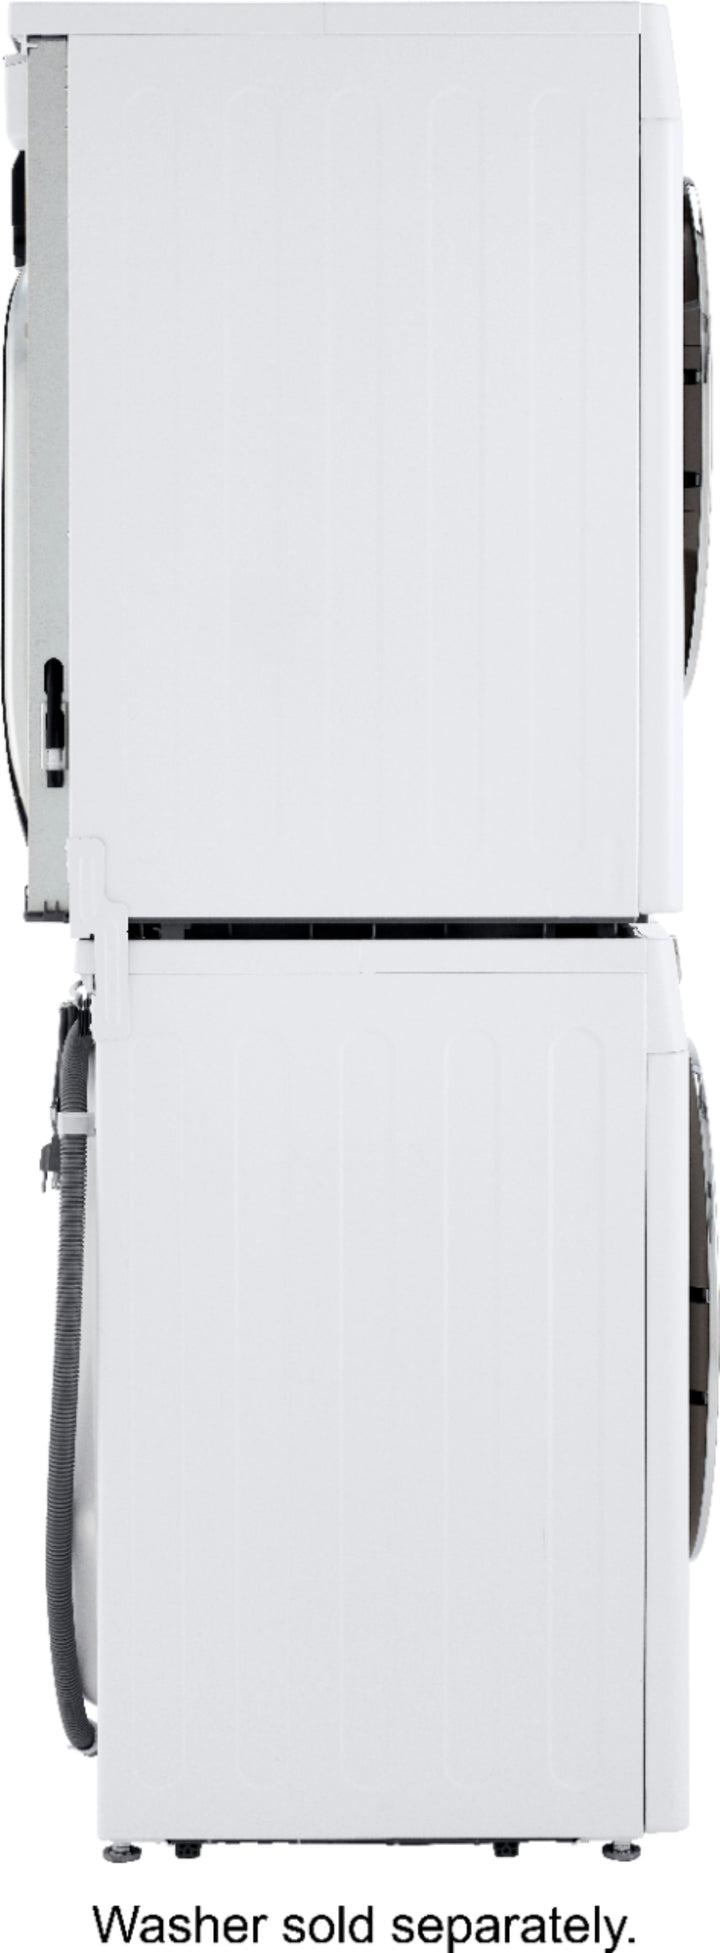 LG - 4.2 cu ft Stackable Electric Dryer with Dual Inverter HeatPump - White_22